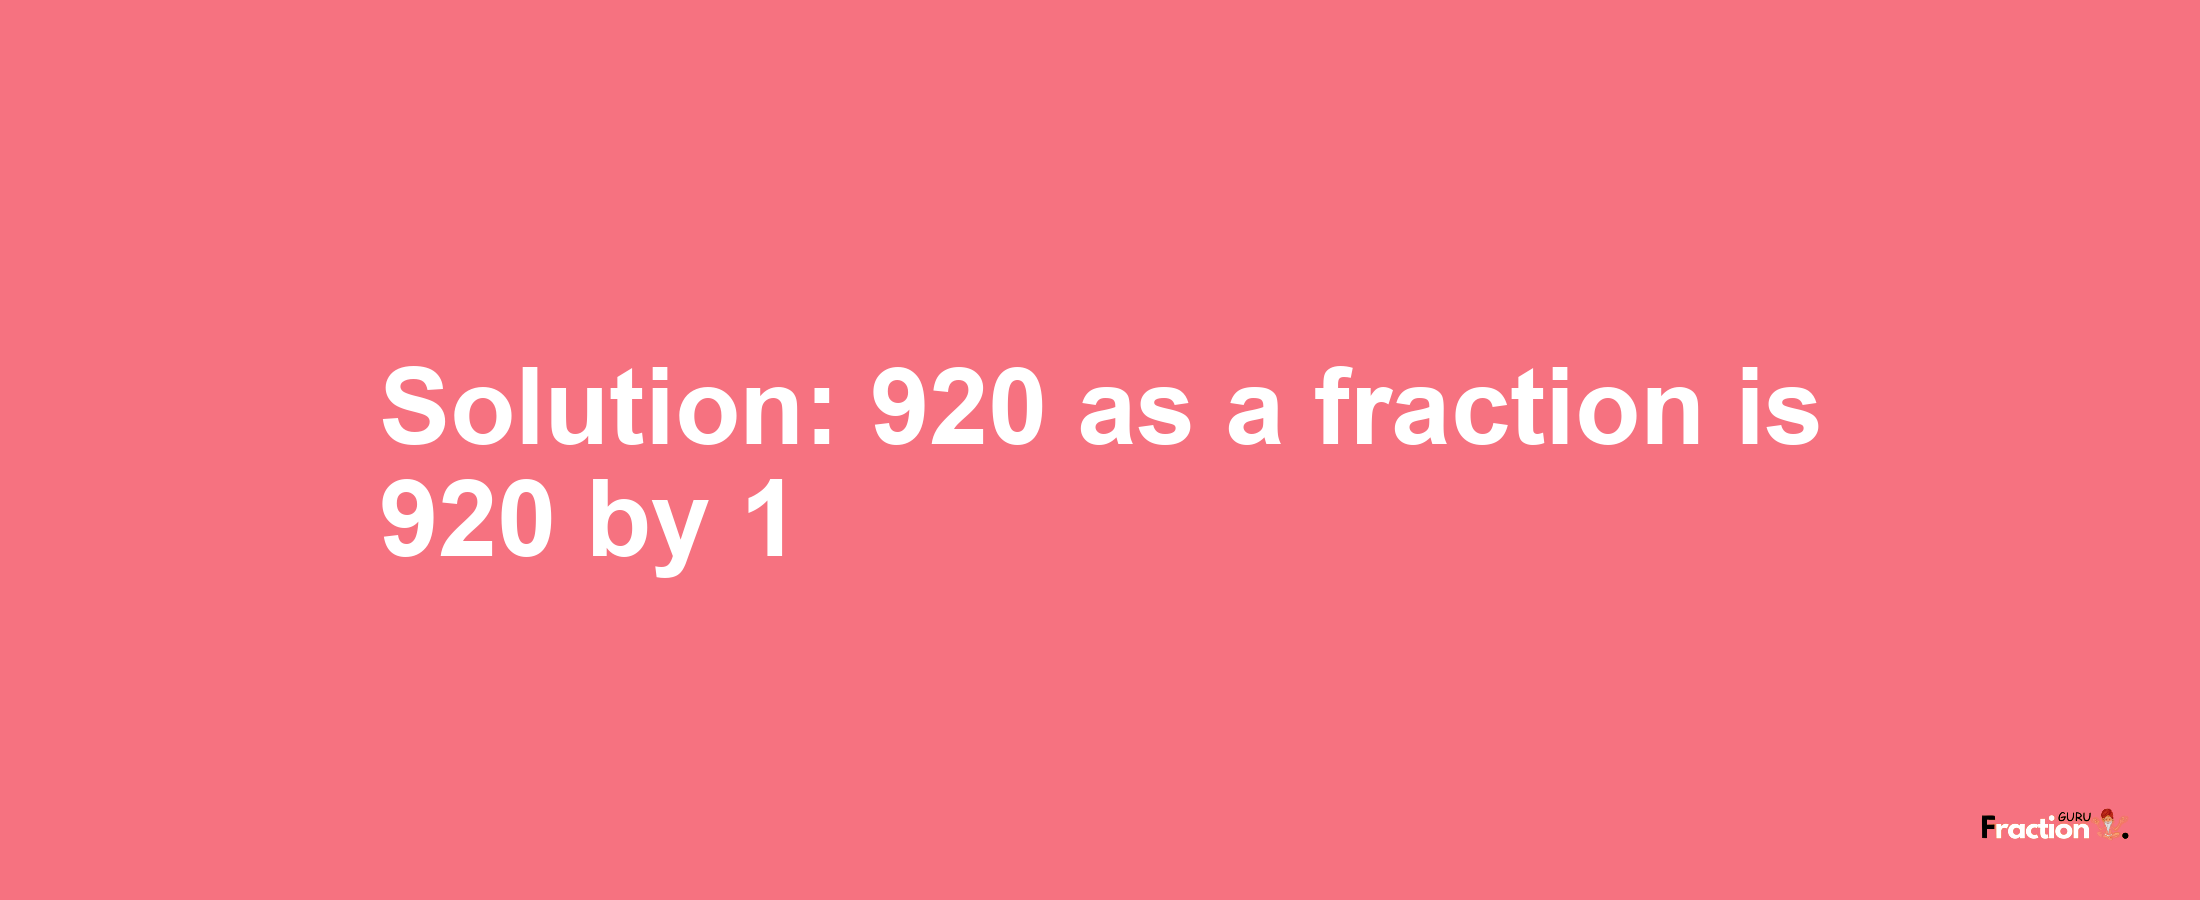 Solution:920 as a fraction is 920/1